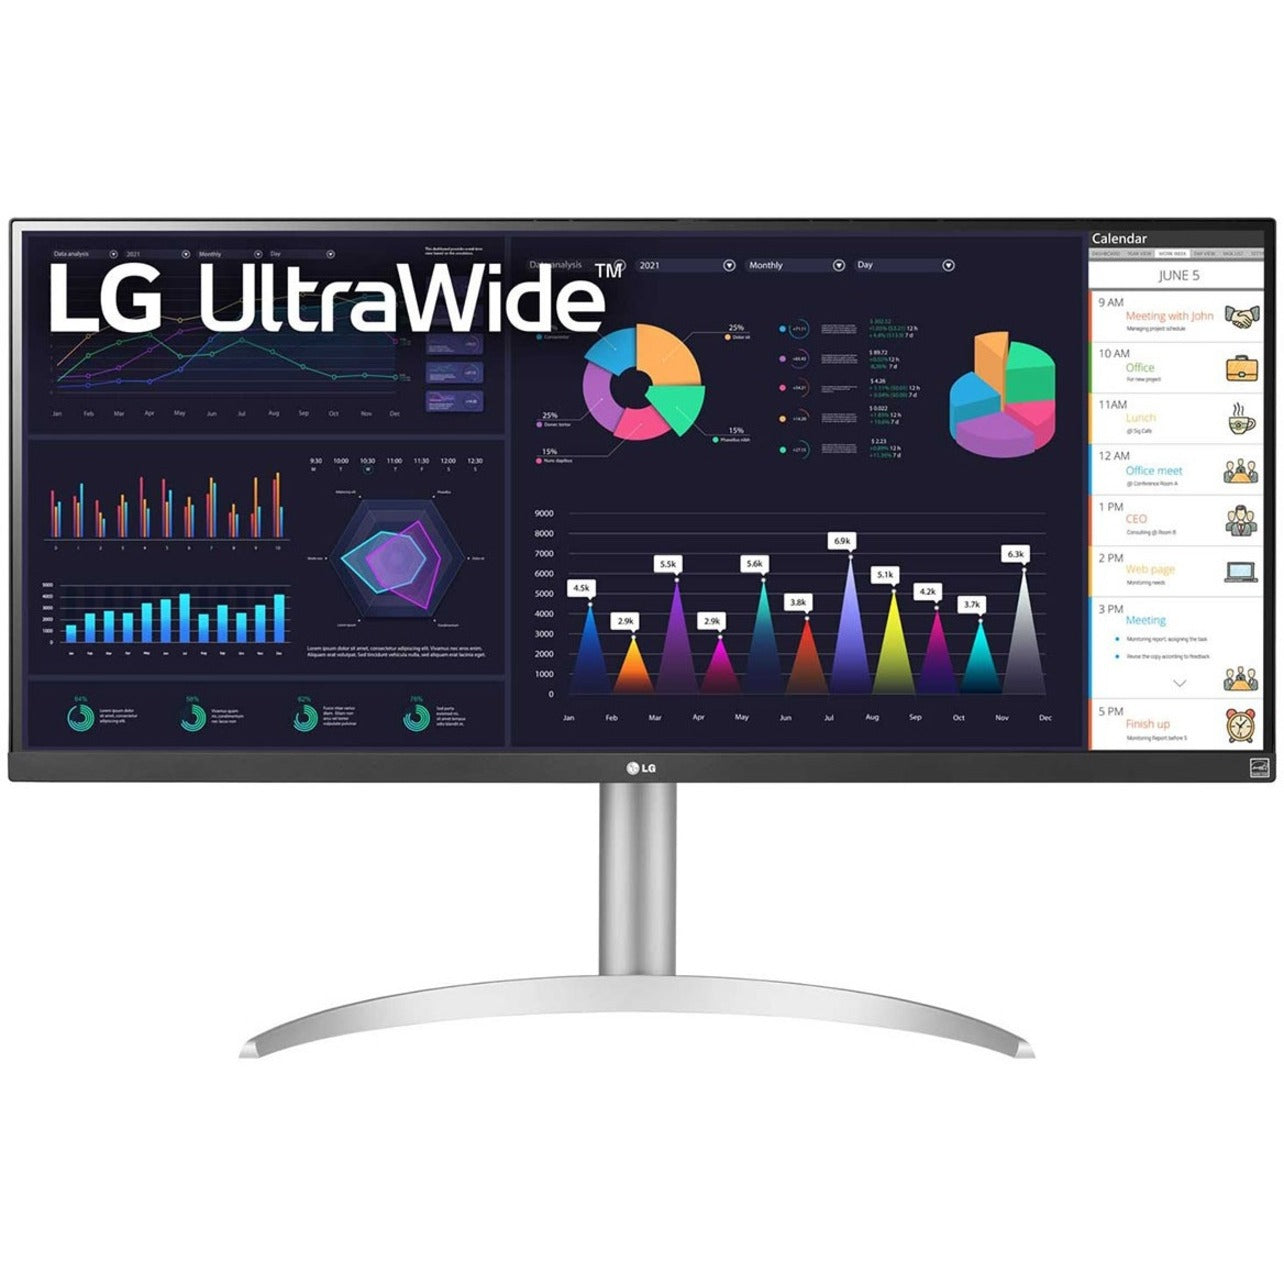 LG 34WQ650-W.AUS Ultrawide 34 LCD Monitor, 100Hz, IPS with HDR 400 Compatibility, AMD FreeSync, USB Type-C